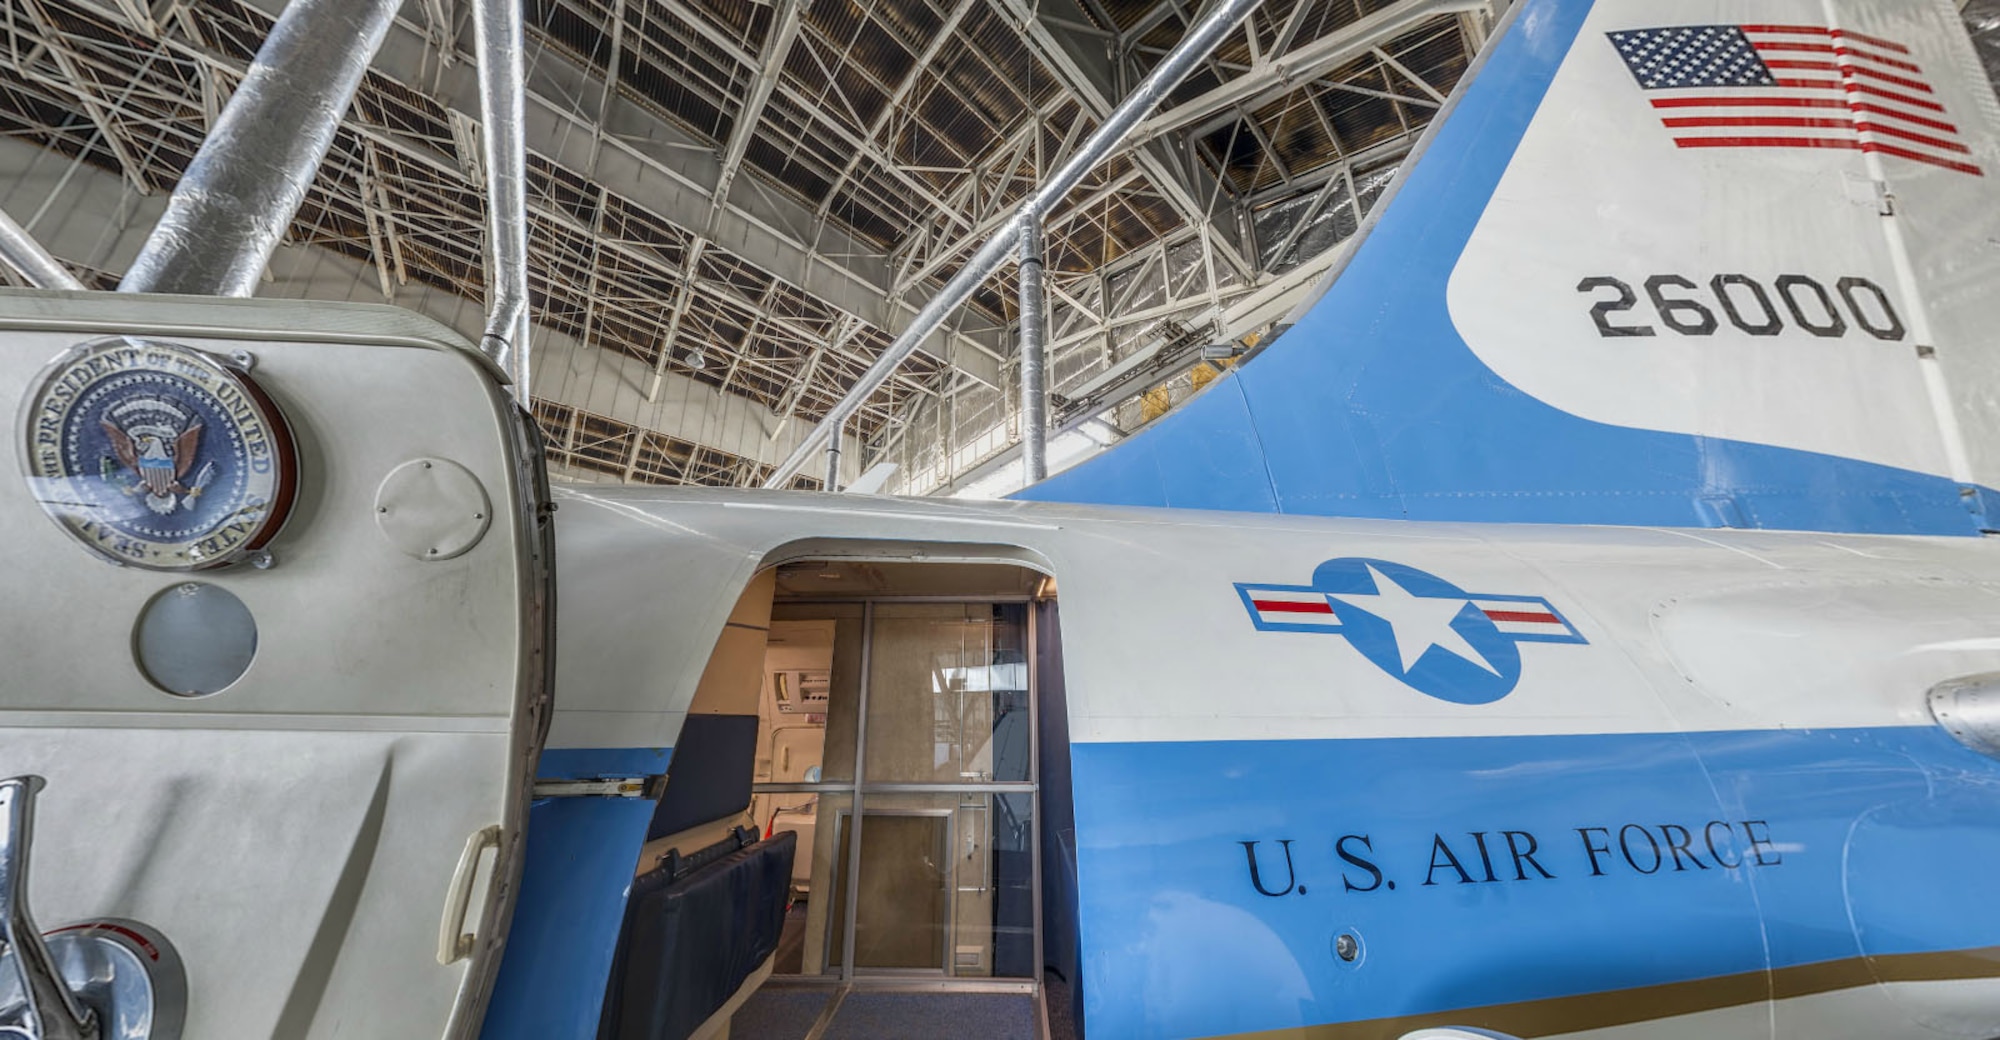 DAYTON, Ohio -- Aft aircraft entrance of Boeing VC-137C SAM 26000 (Air Force One) at the National Museum of the U.S. Air Force. This photo is part of the free ACI Cockpit360º app, which features high-definition panoramic photos of more than 20 cockpits from many well-known aircraft on display at the National Museum of the U.S. Air Force. (Photo courtesy of Lyle Jansma, Aerocapture Images)